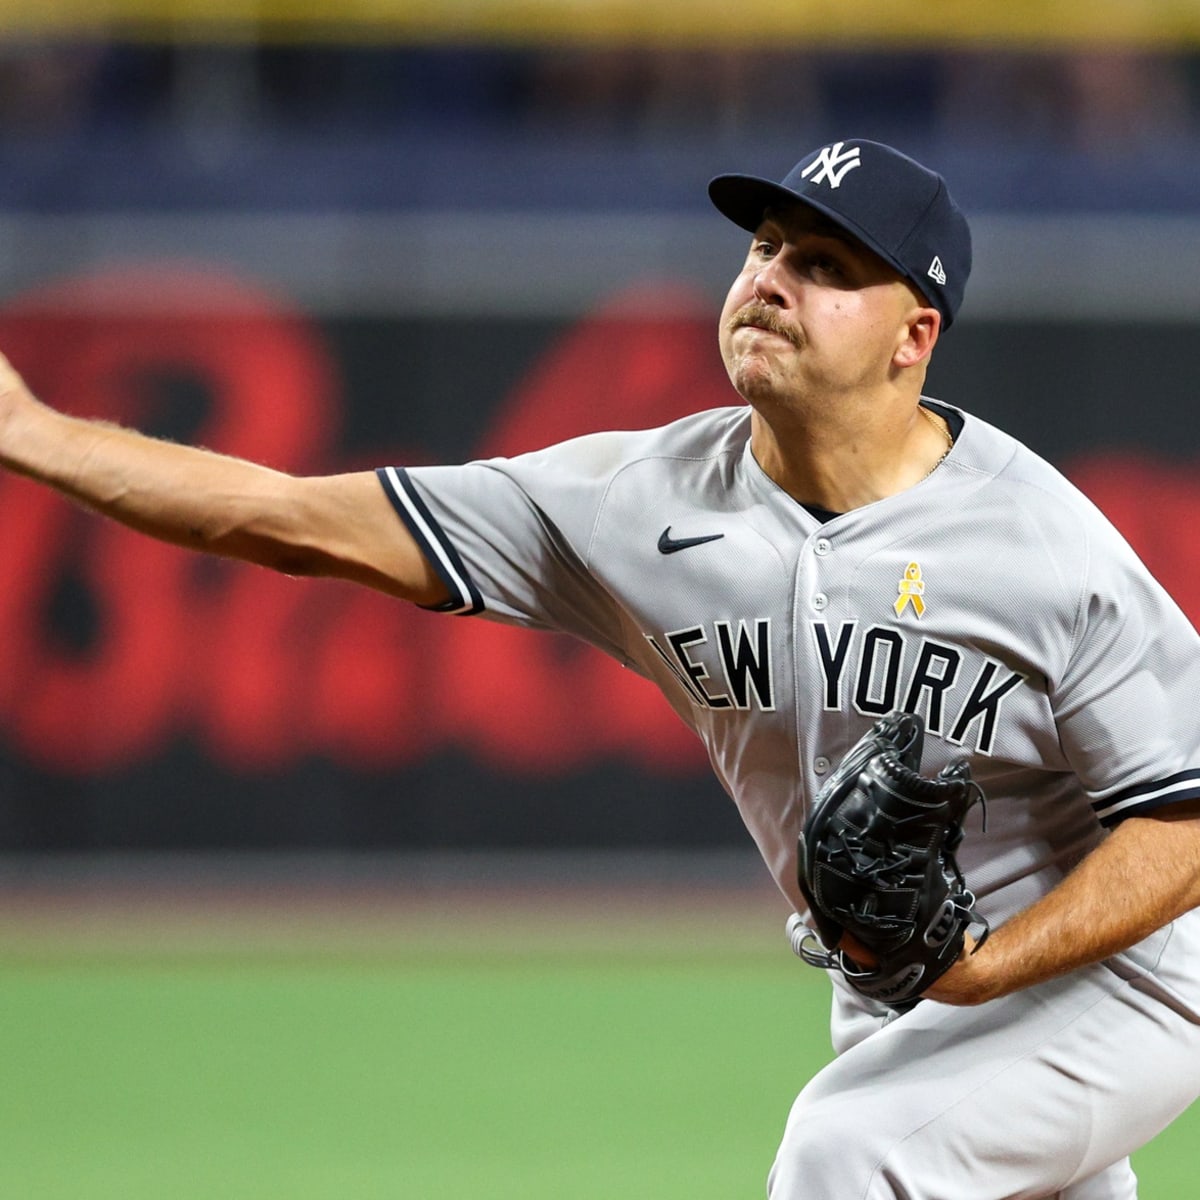 Star-powered Yankees pitching staff faces early challenge